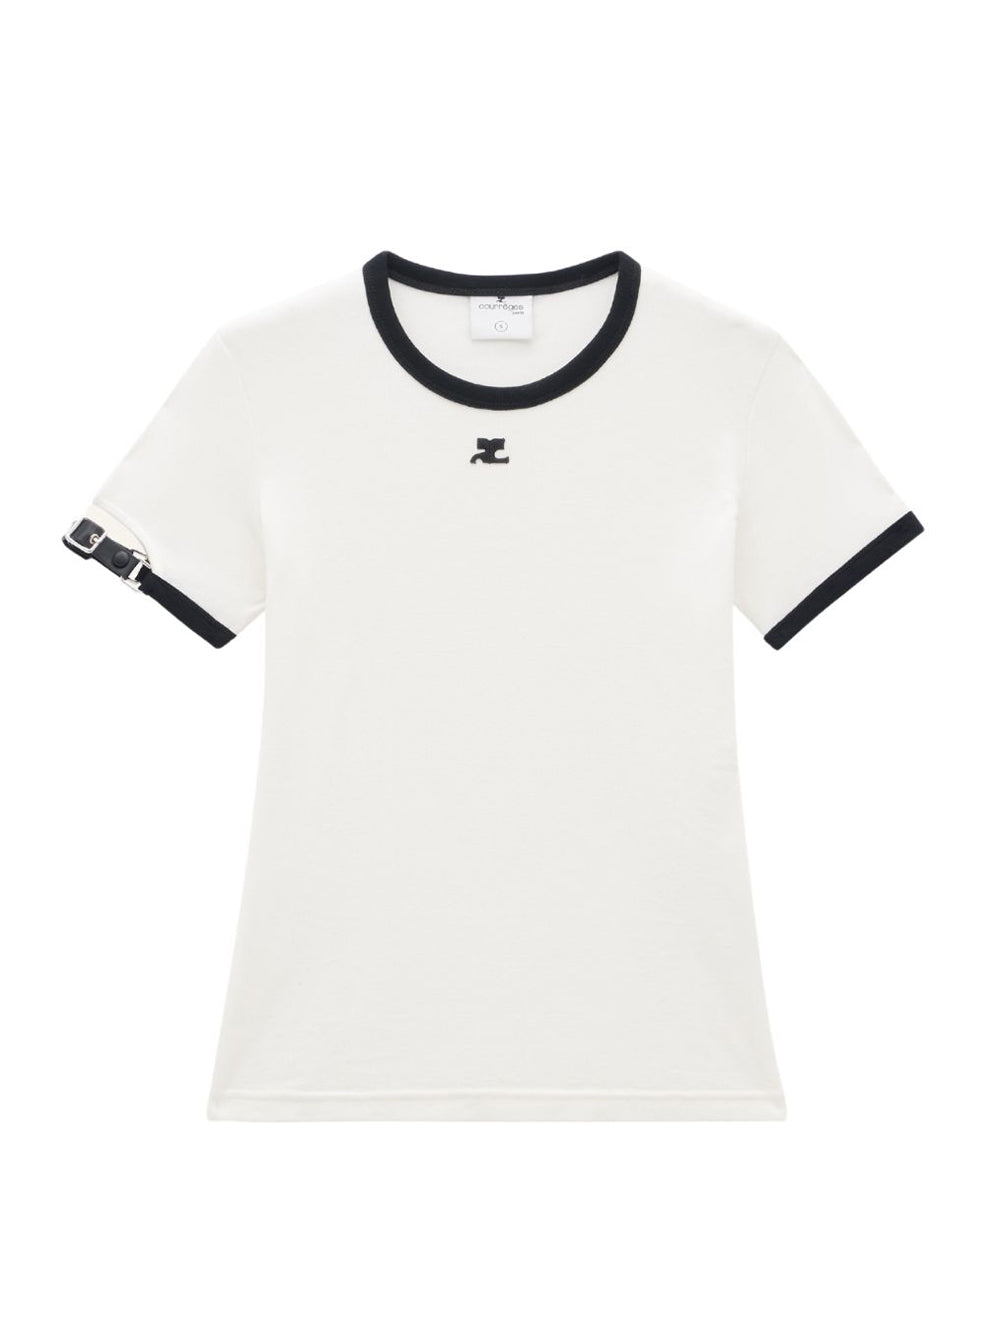 Buckle Contrast T-Shirt (Heritage White / Black)